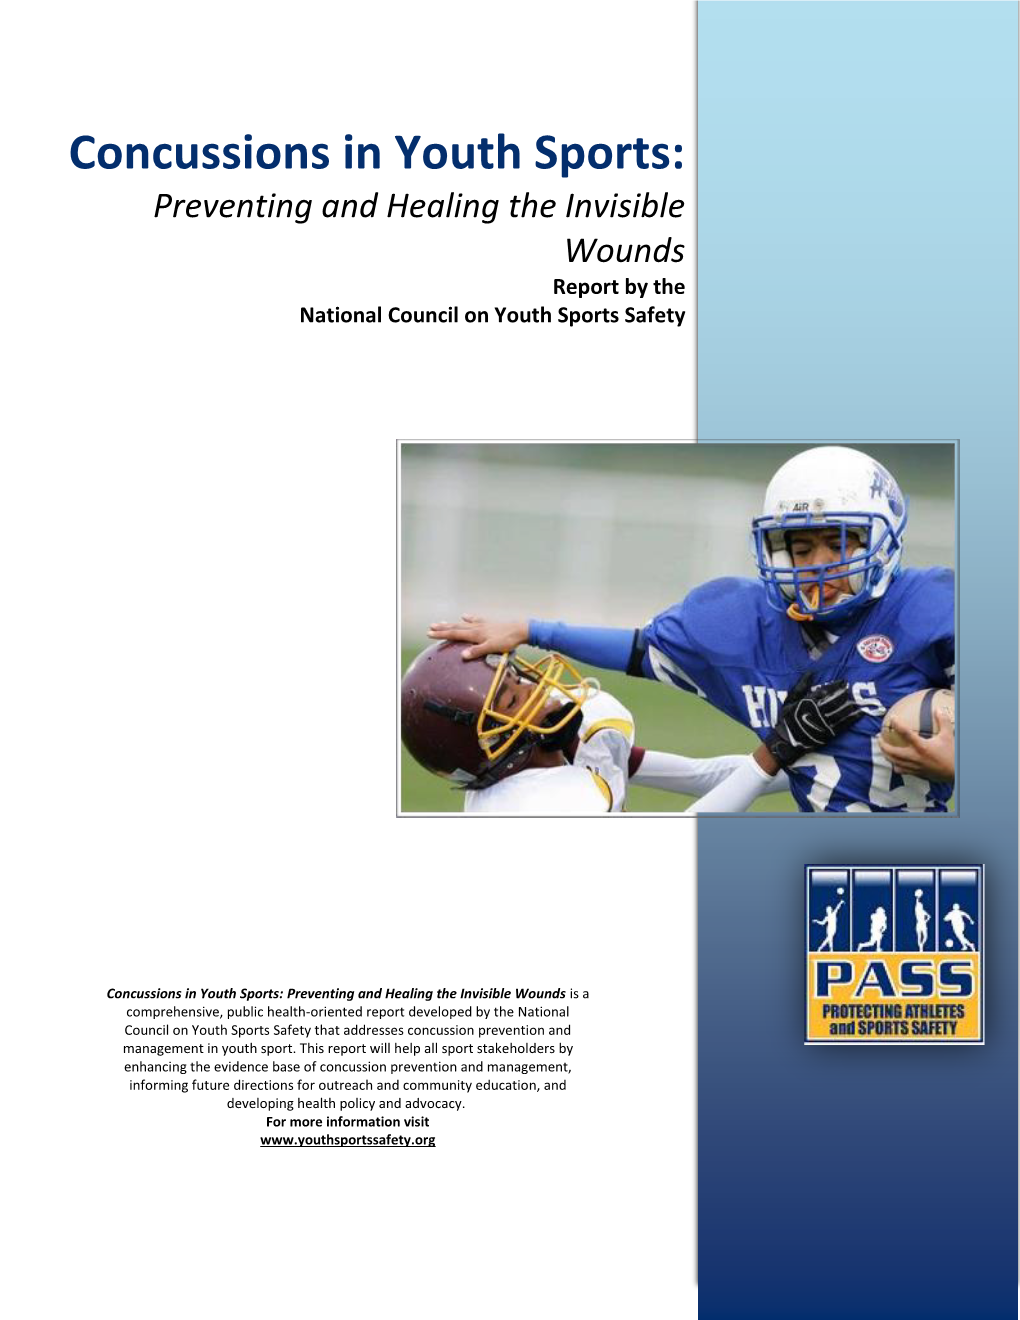 Concussions in Youth Sports: Preventing and Healing the Invisible Wounds Report by the National Council on Youth Sports Safety